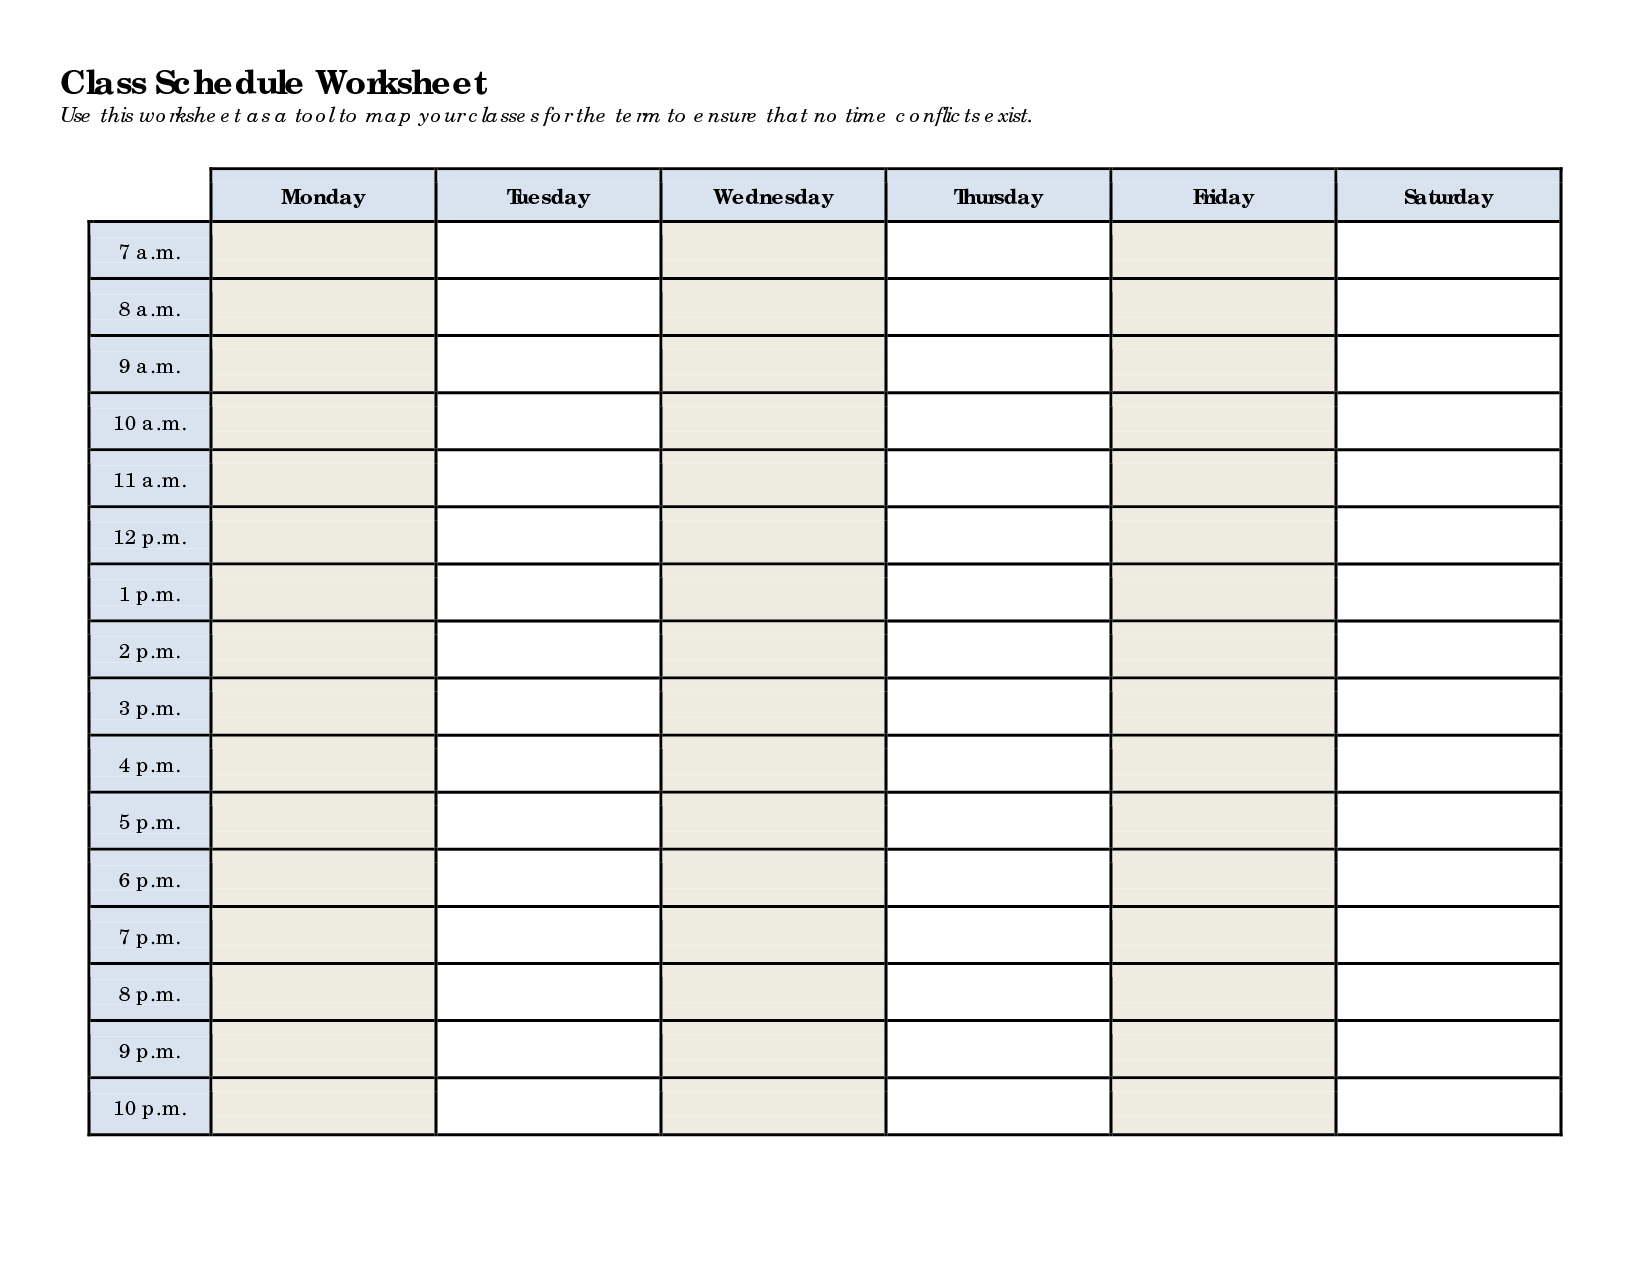 5-best-images-of-printable-blank-class-schedule-weekly-class-schedule-template-free-blank